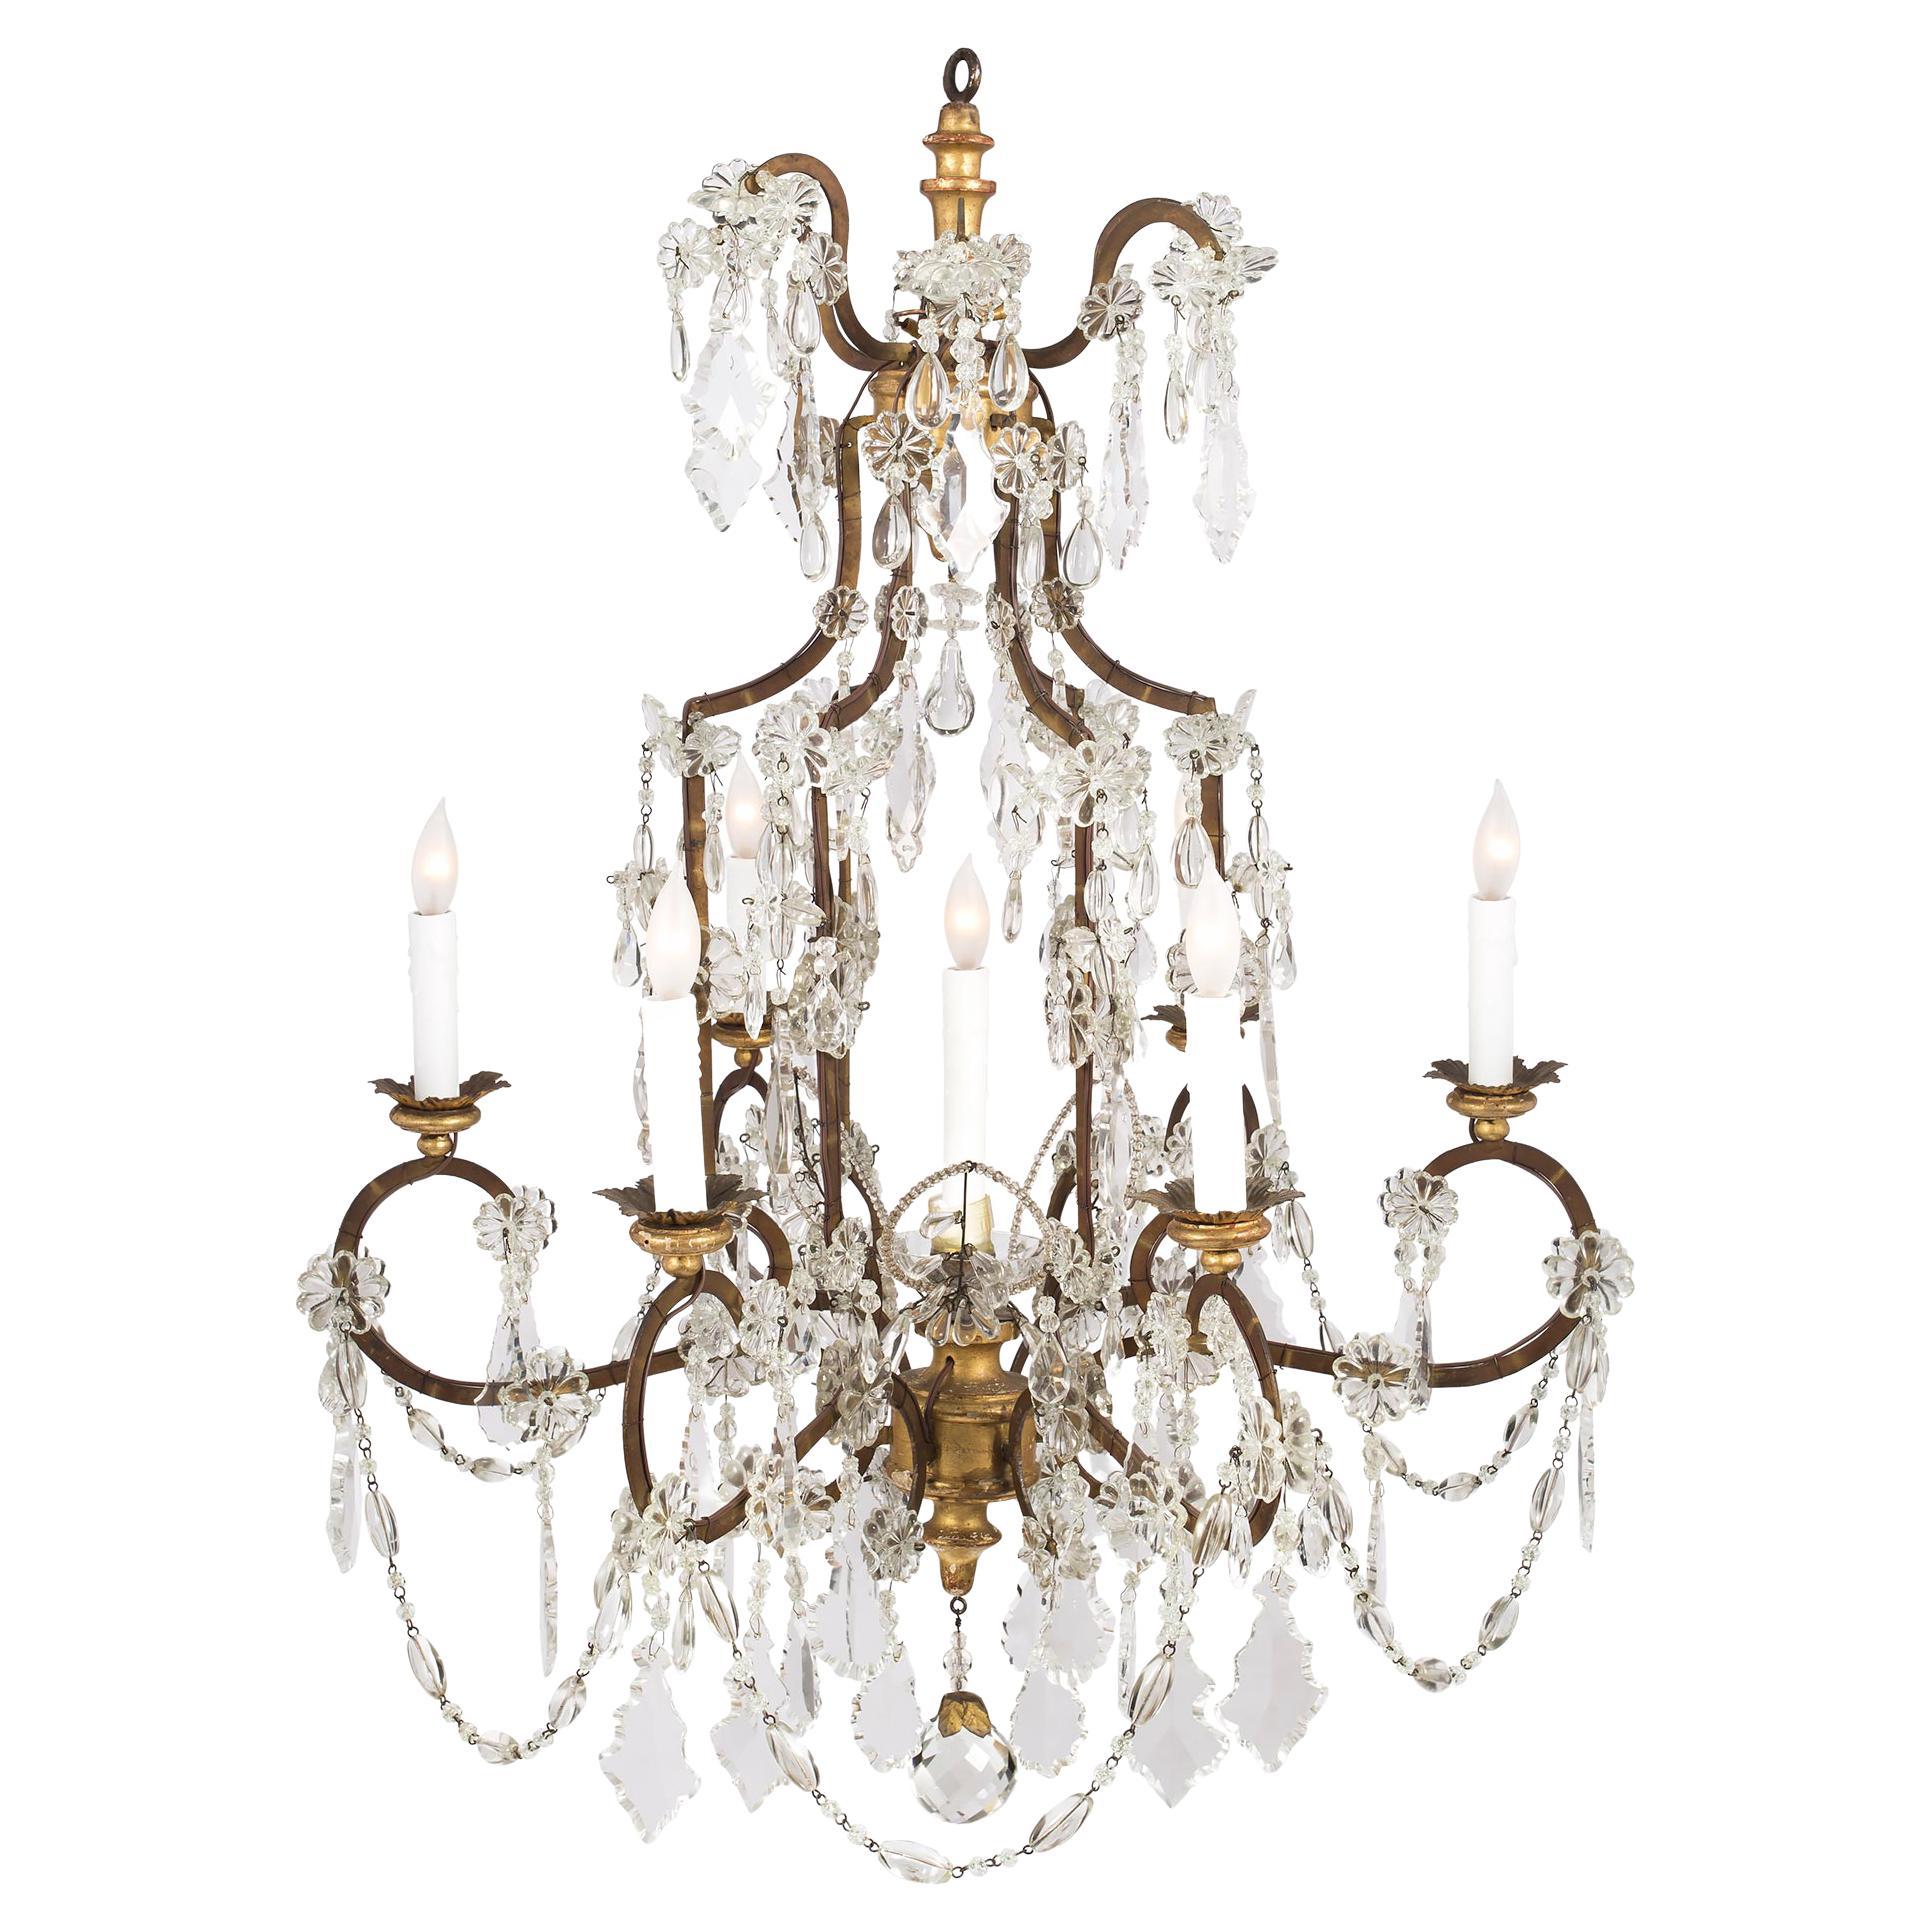 Italian 19th Century Giltwood And Crystal Chandelier For Sale